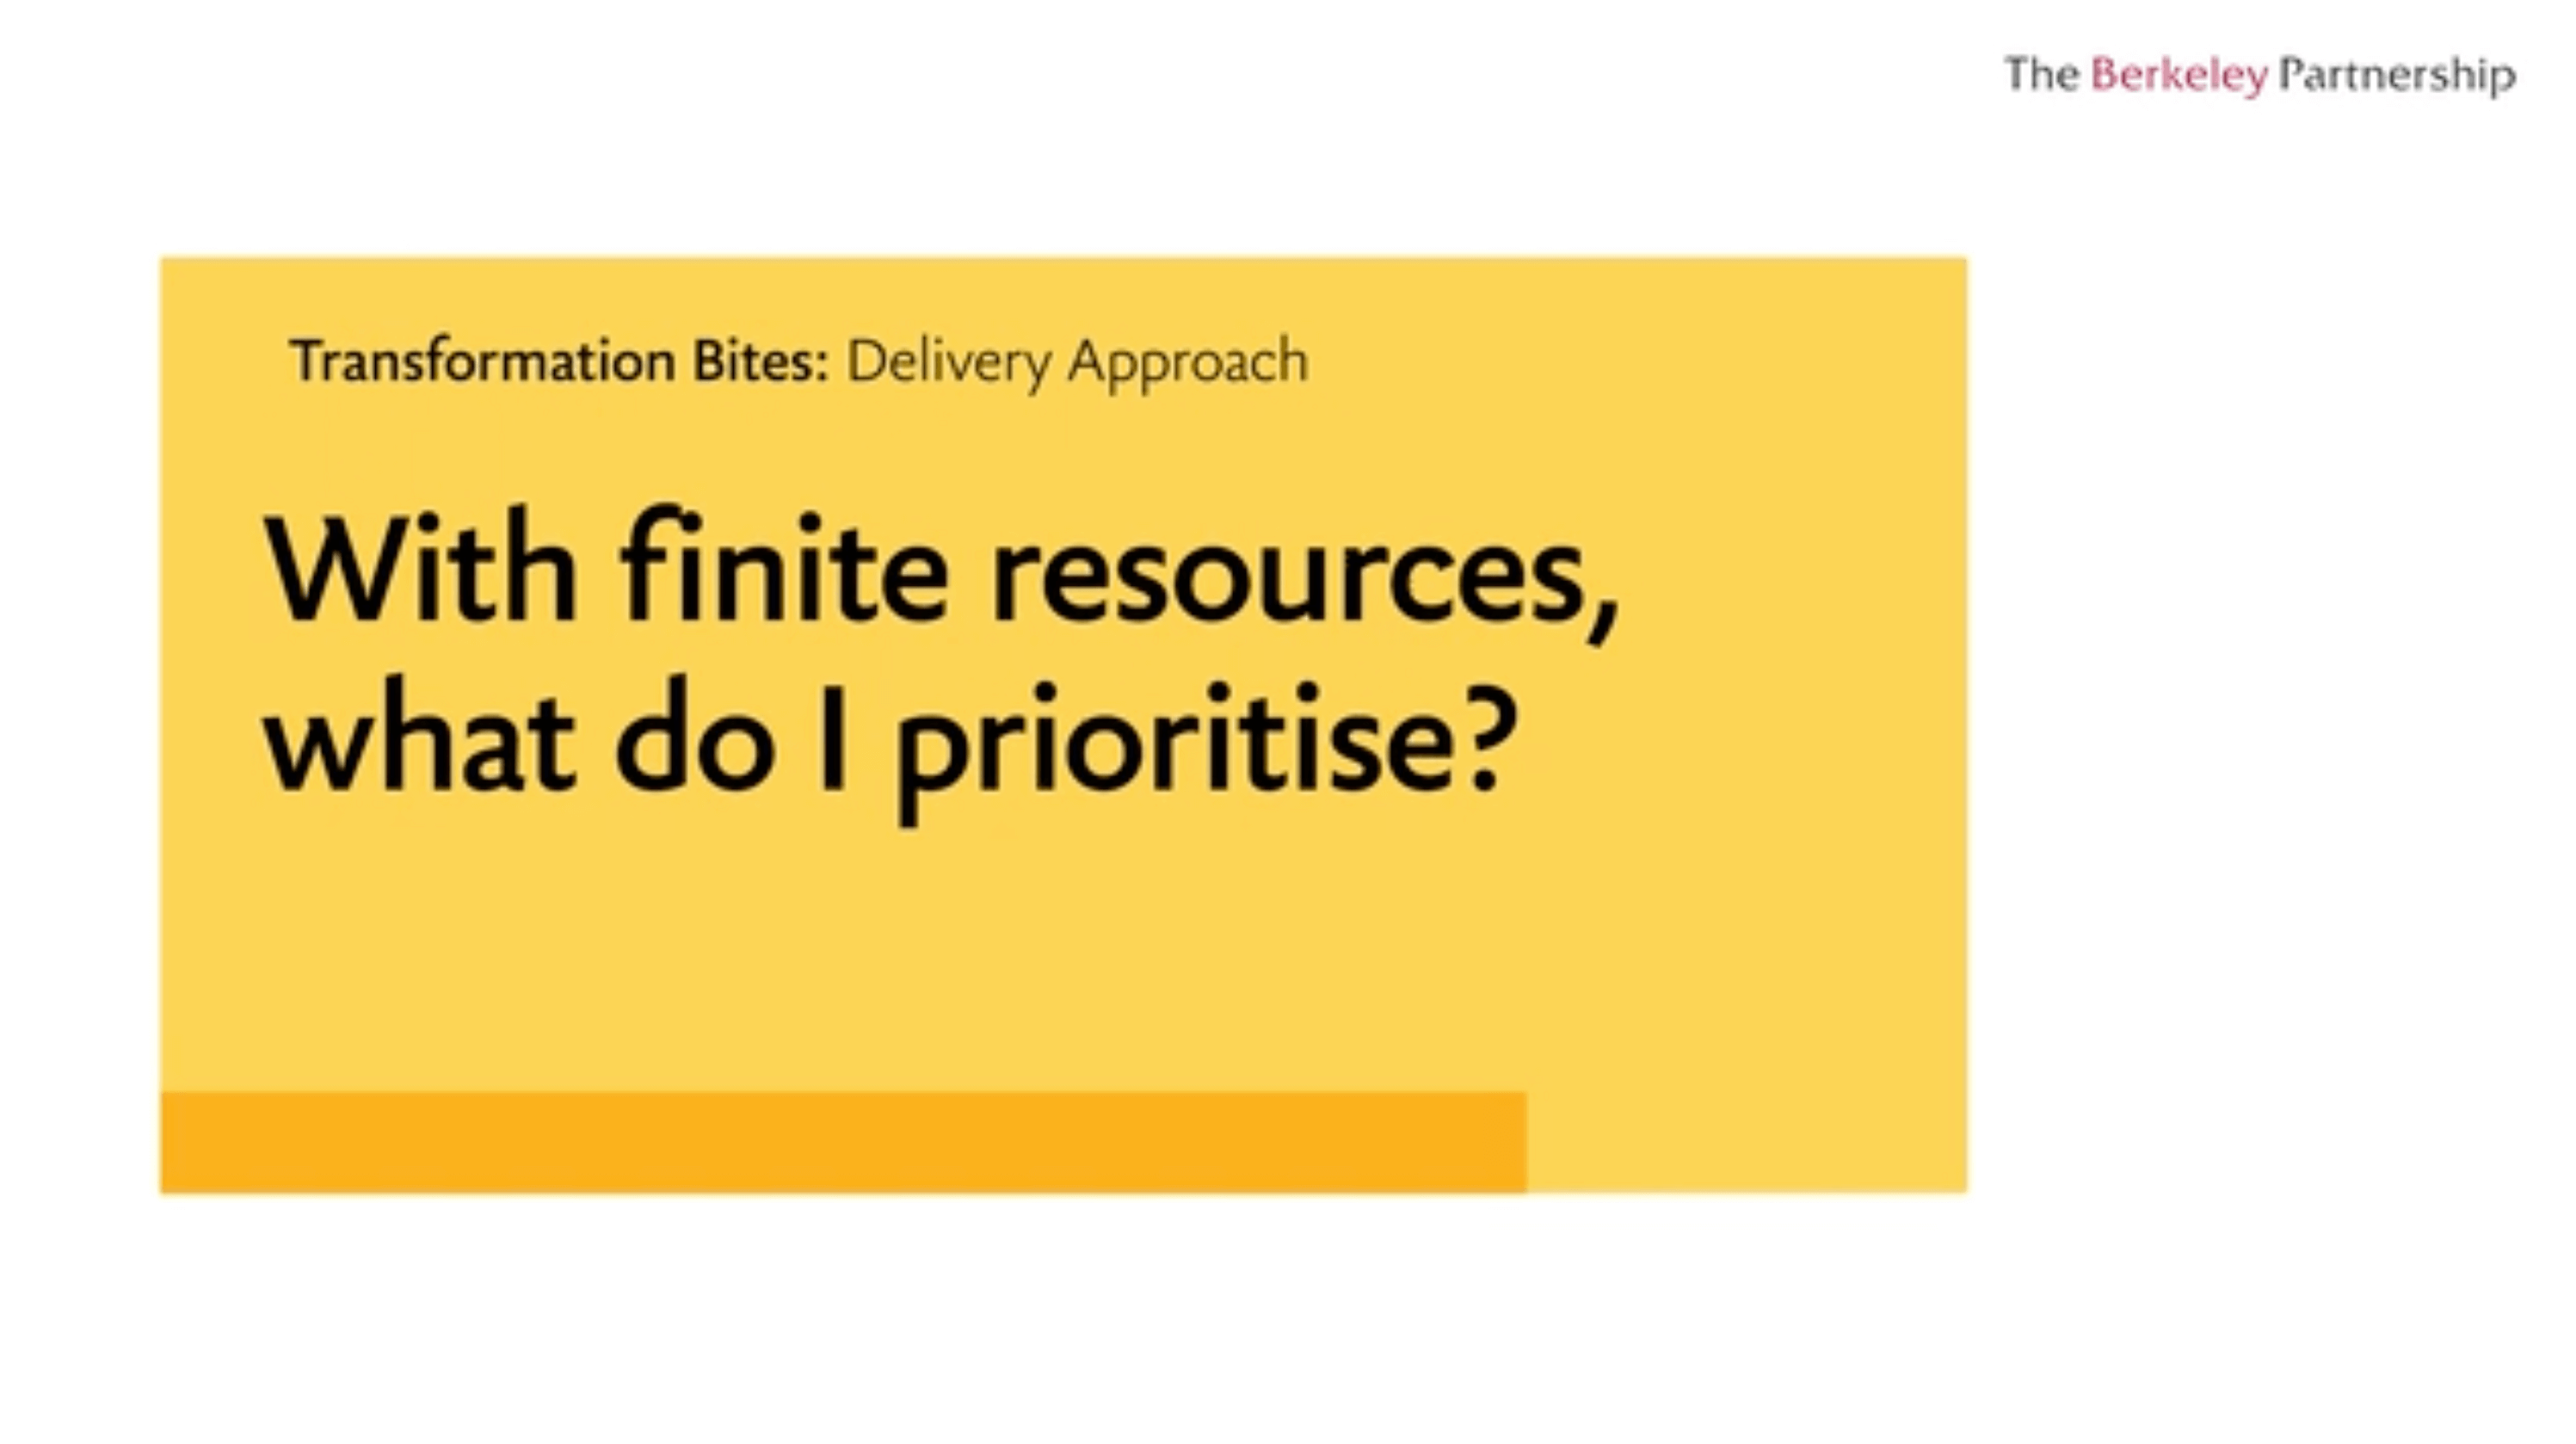 With finite resources, what do I prioritize?